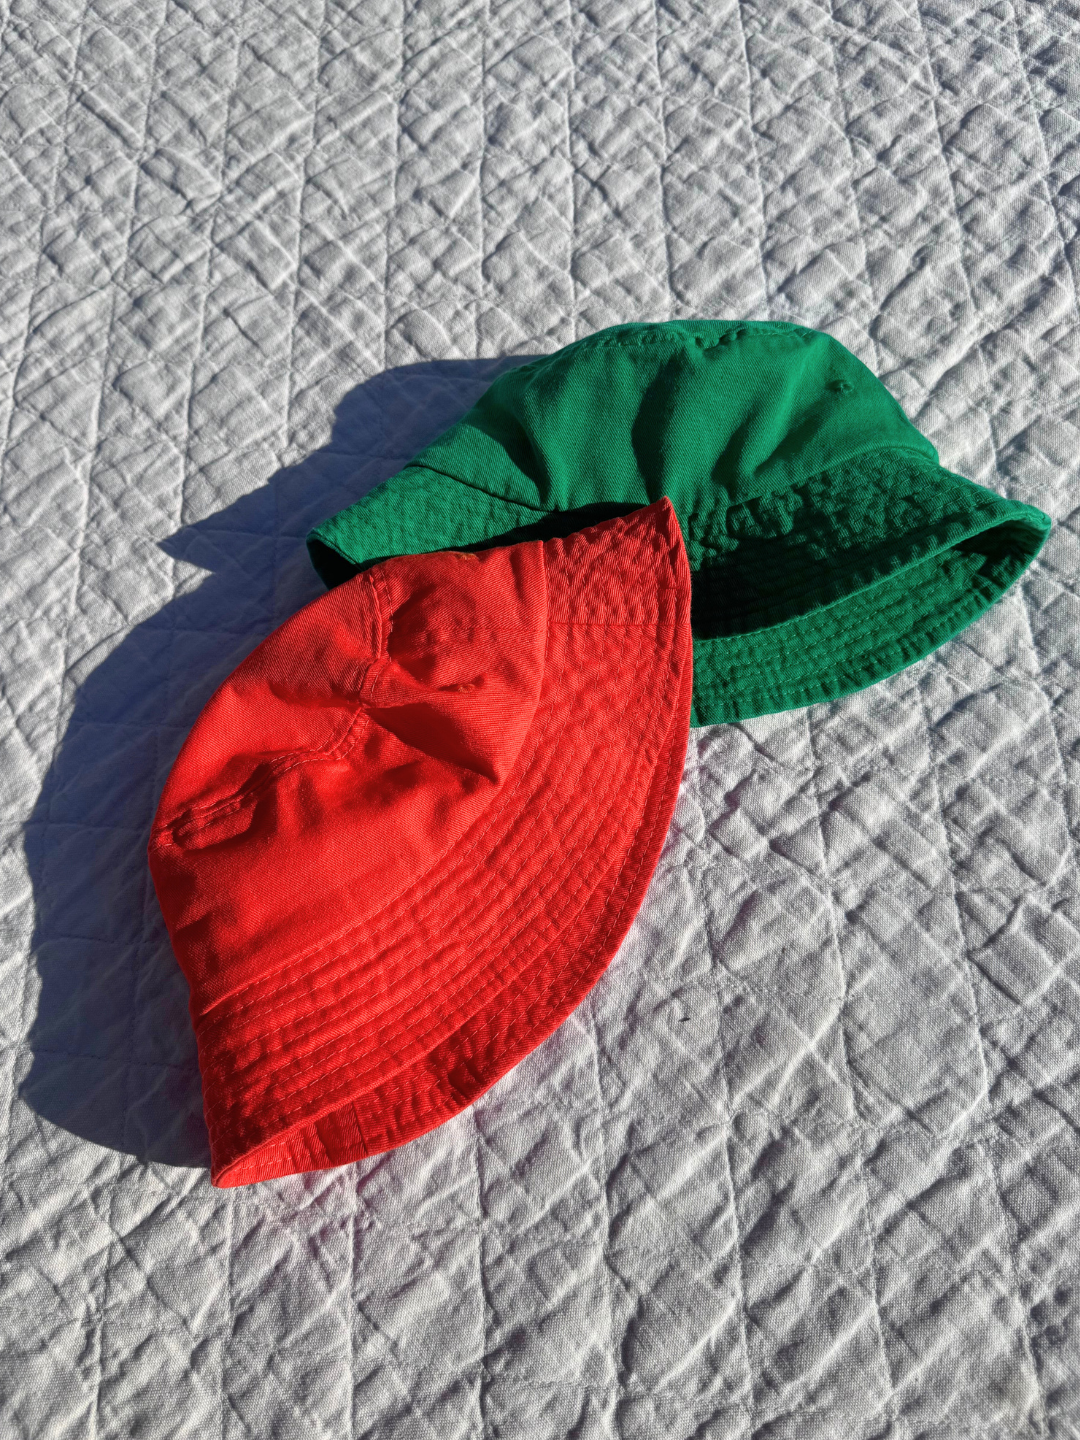 TWO KID'S PICNIC BUCKET HATS  IN TOMATO ORANGE AND KELLY GREEN ARE LAID FLAT ON BLANKET